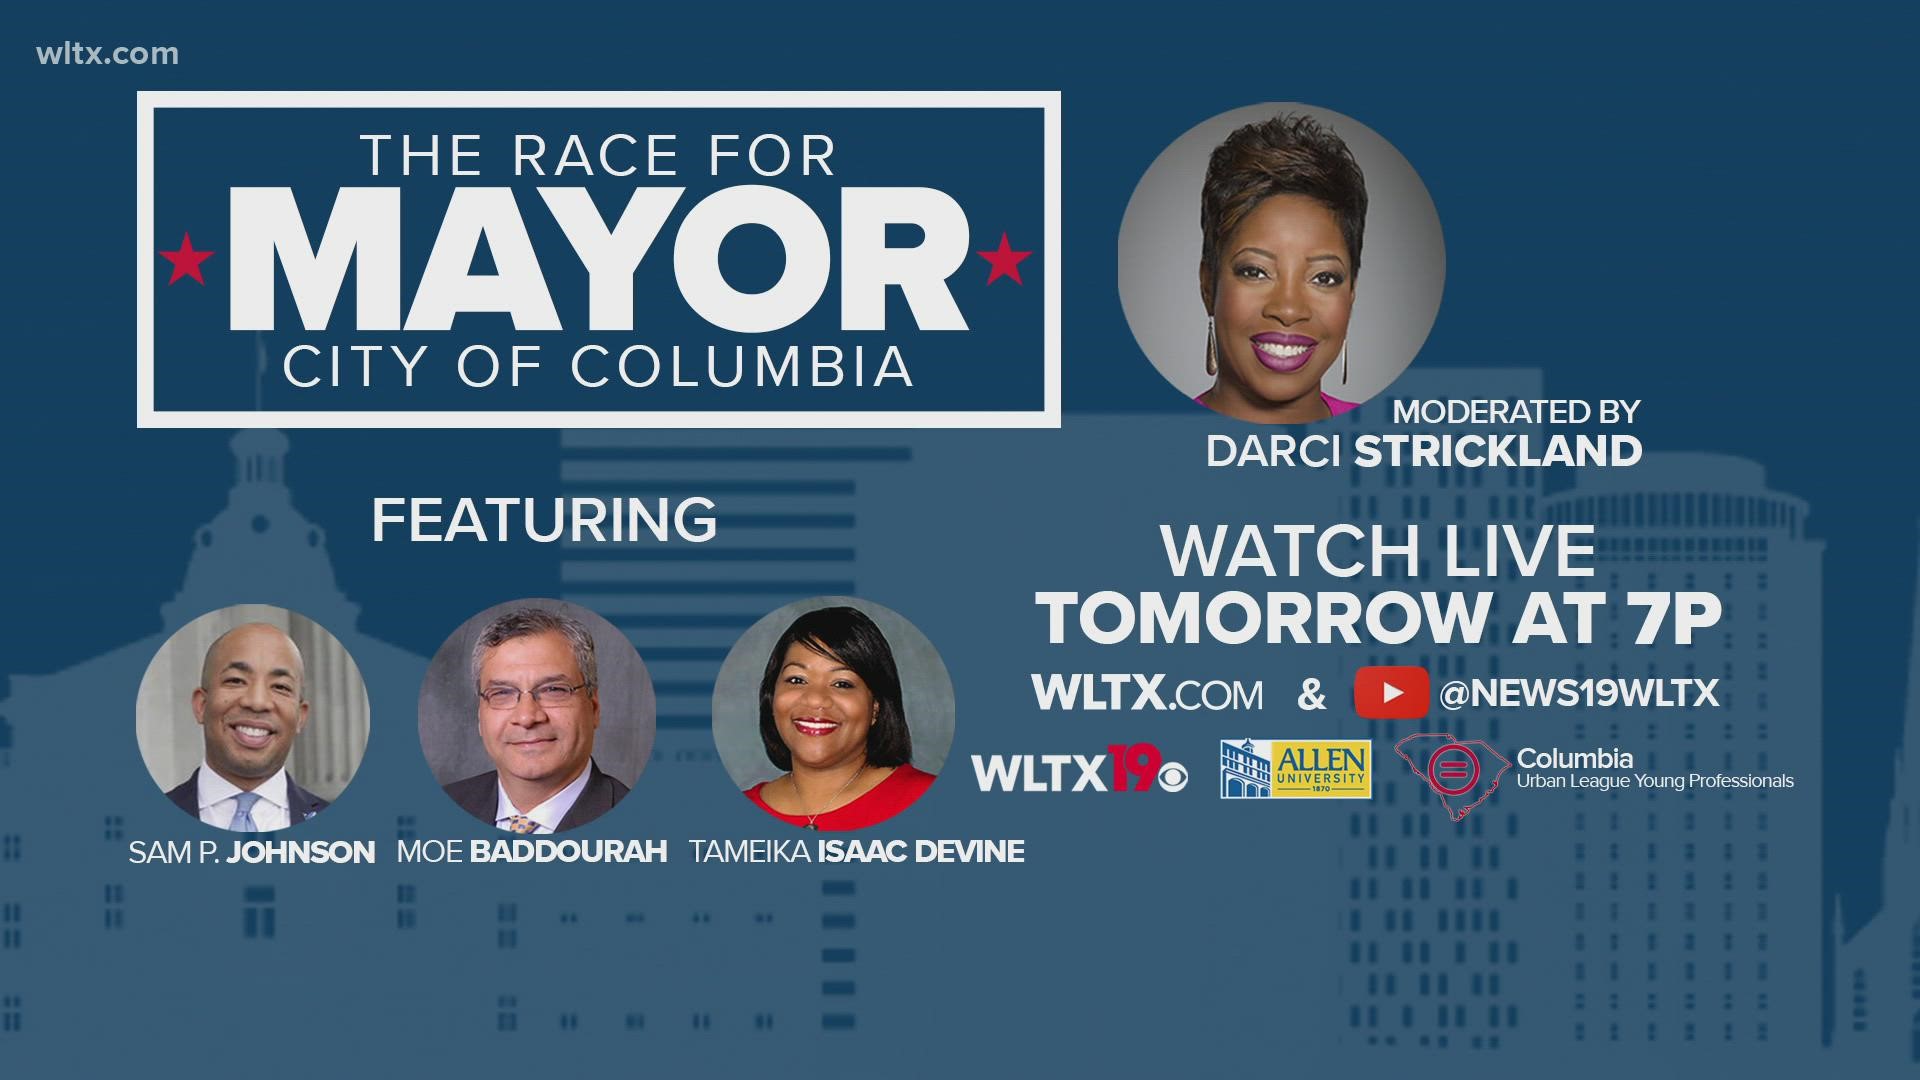 Three out of the four candidates will participate in a debate Tuesday night.  You can watch on WLTX